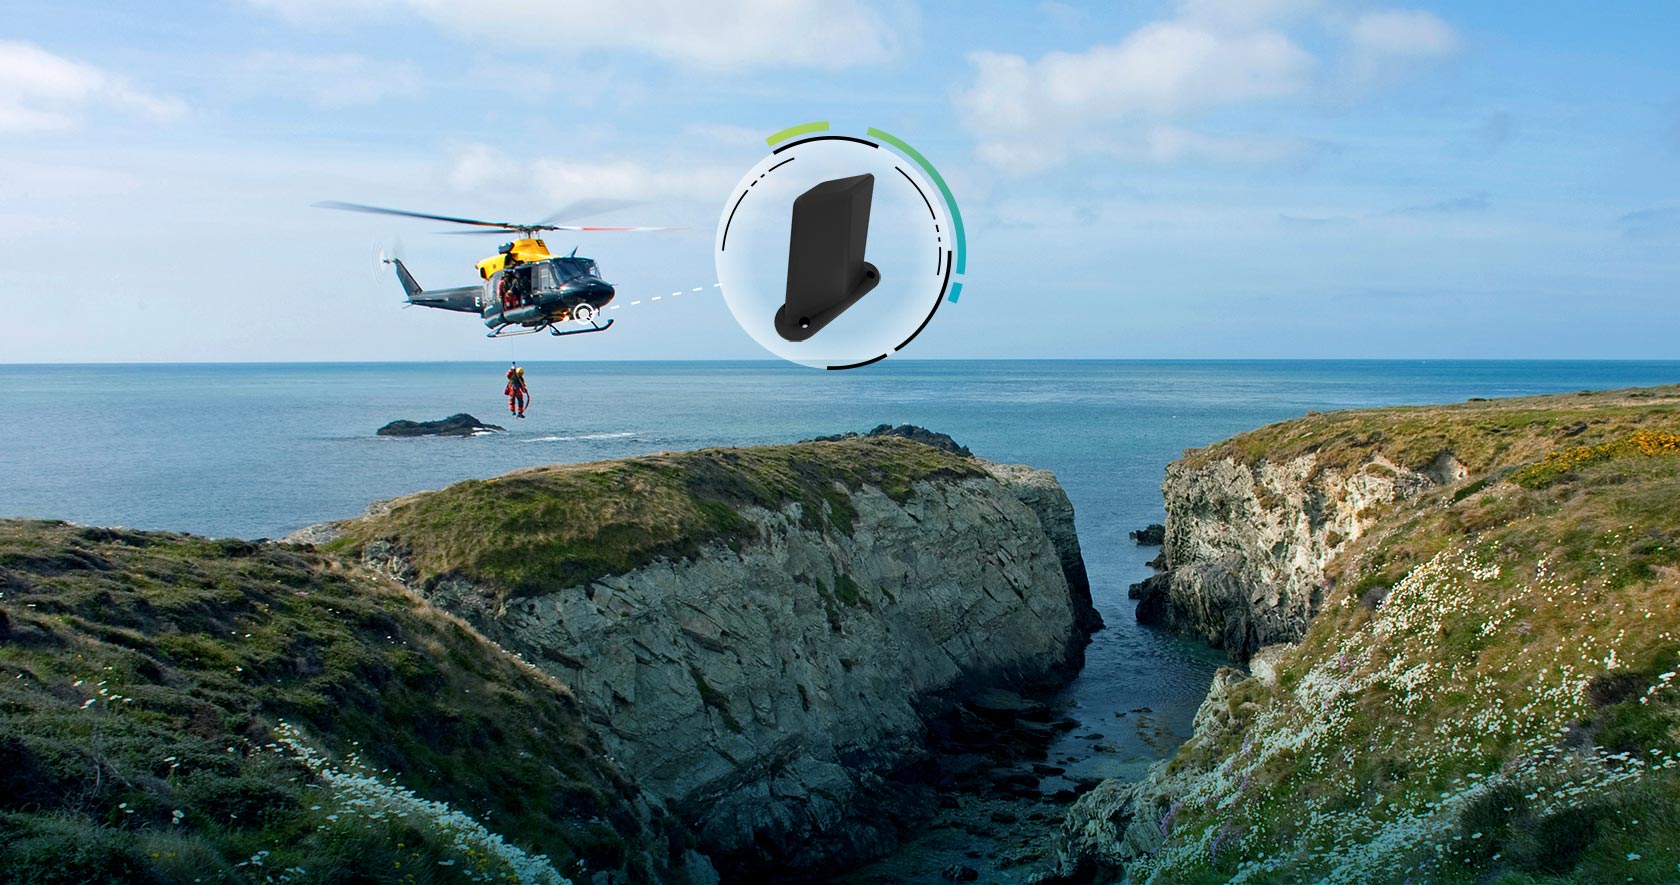 Search and rescue helicopter suspending a person over a waterside cliff with an Antcom 5B antenna